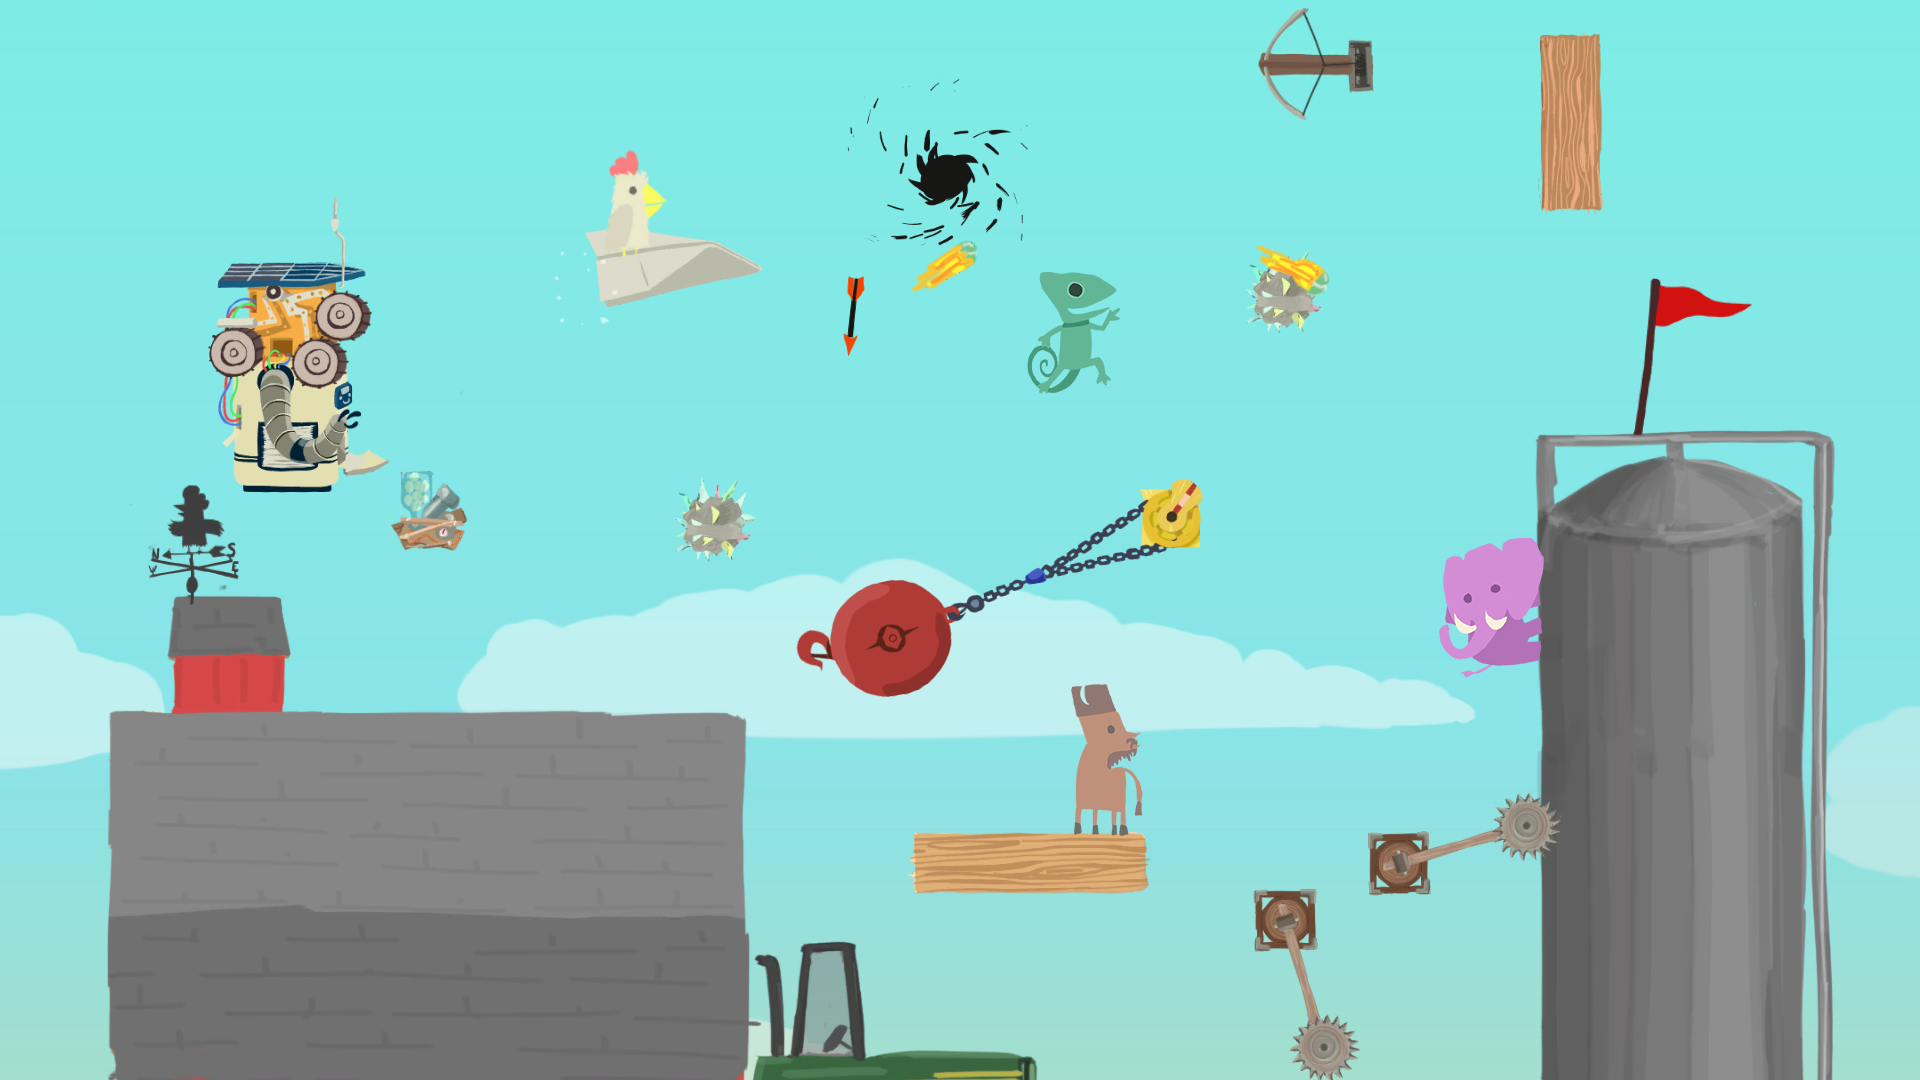 ultimate chicken horse ps4